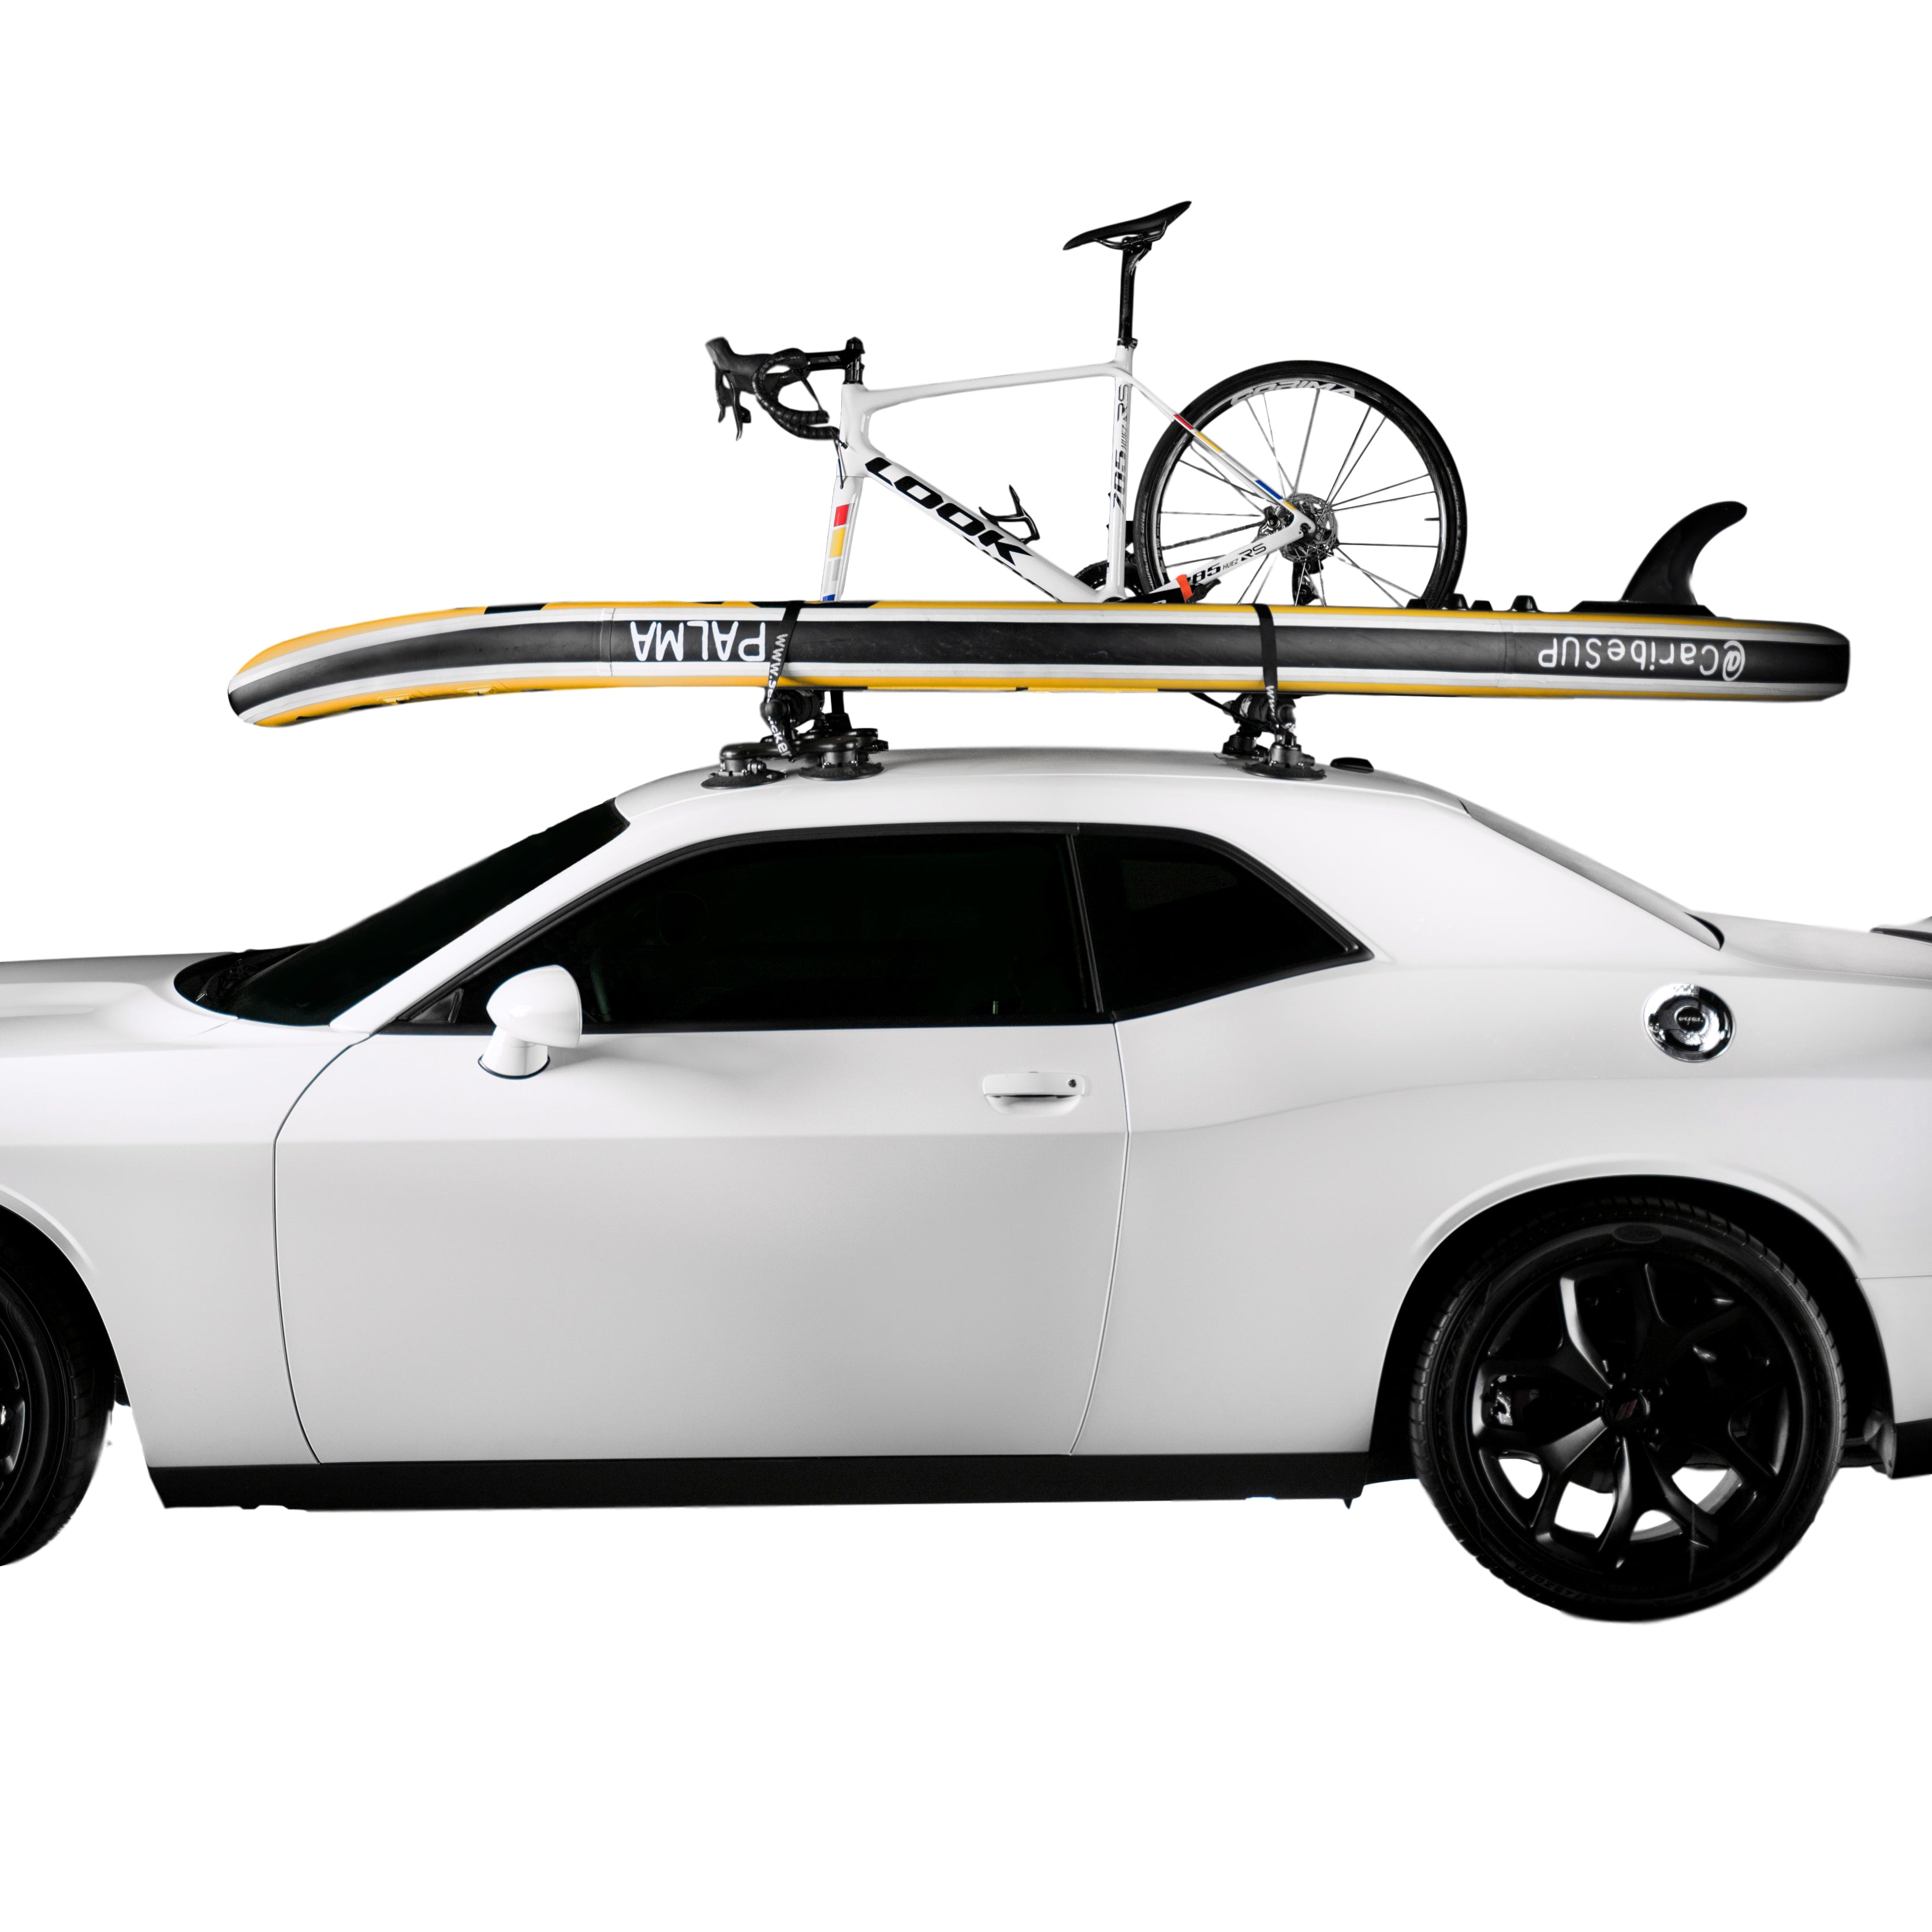 Roof racks and accessories specialist